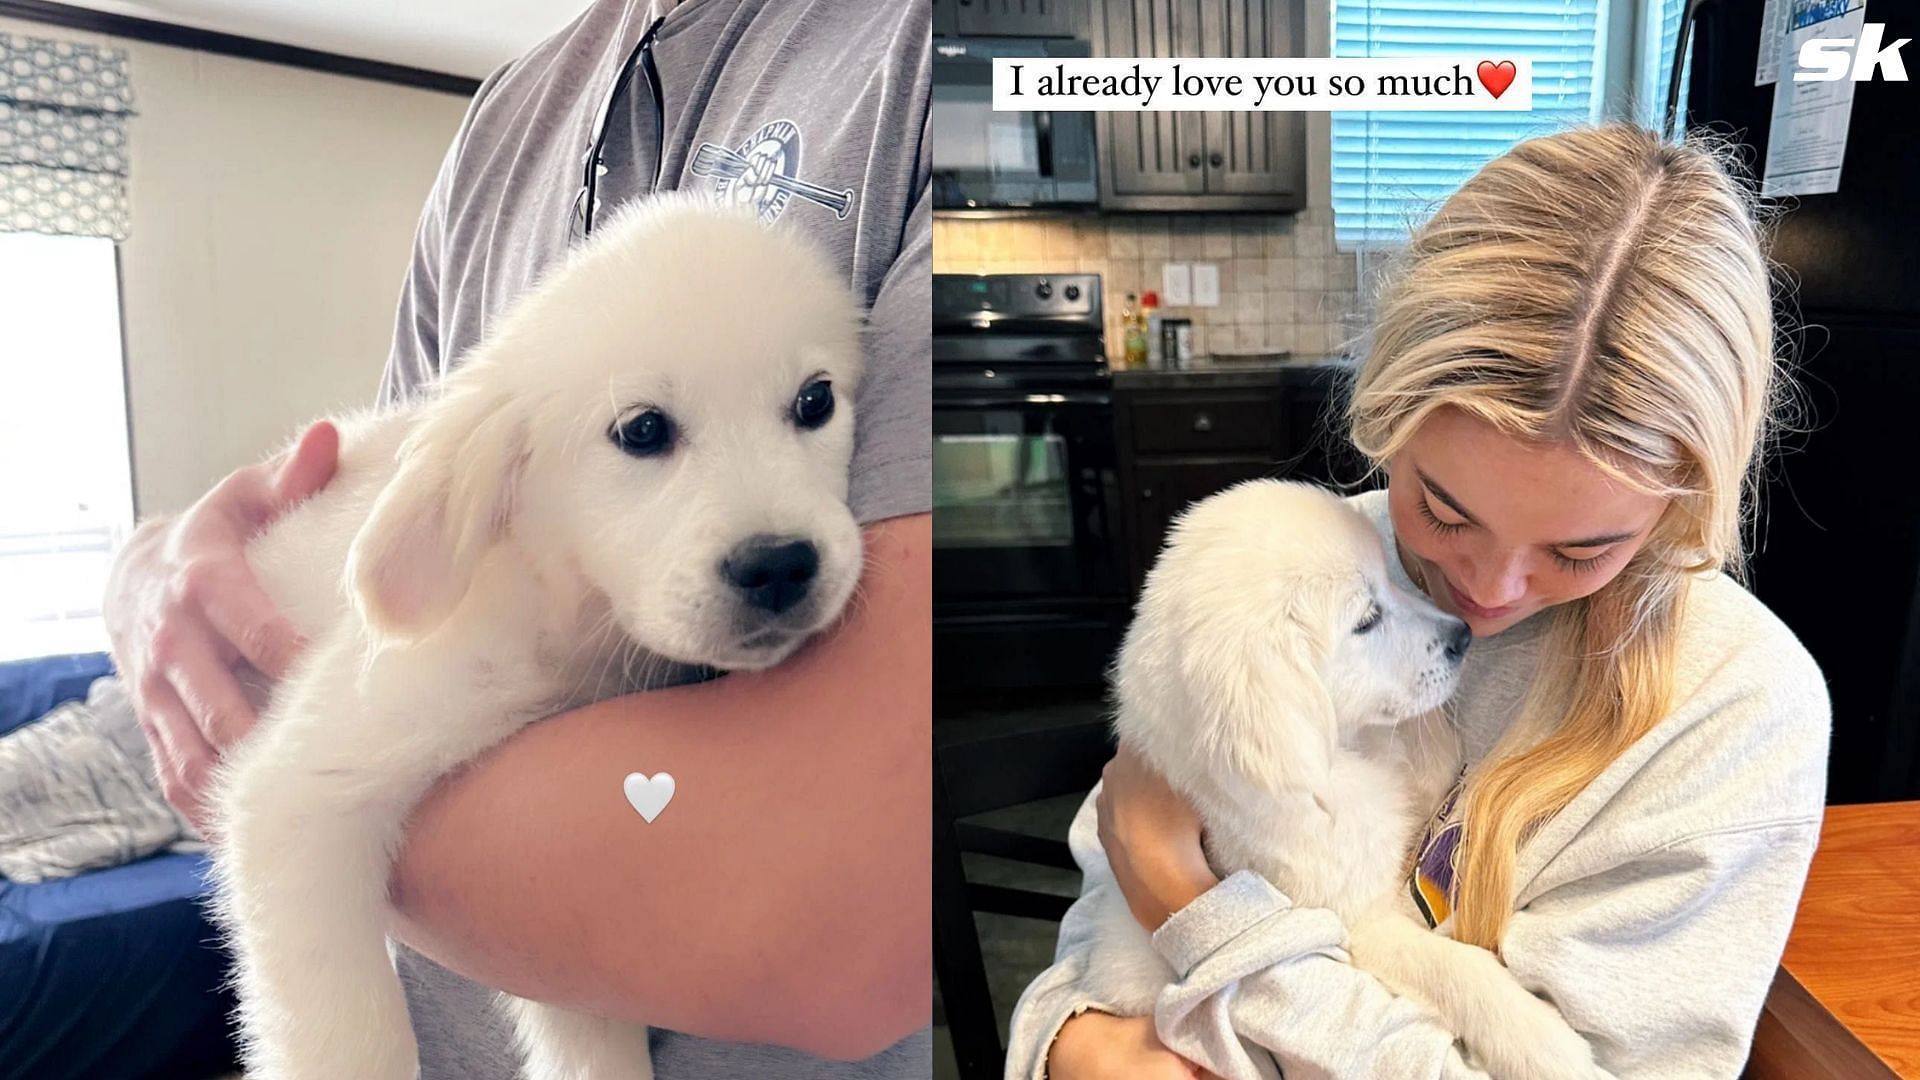 Olivia Dunne introduces her adorable new pup to Instagram family: &quot;I already love you so much&quot;